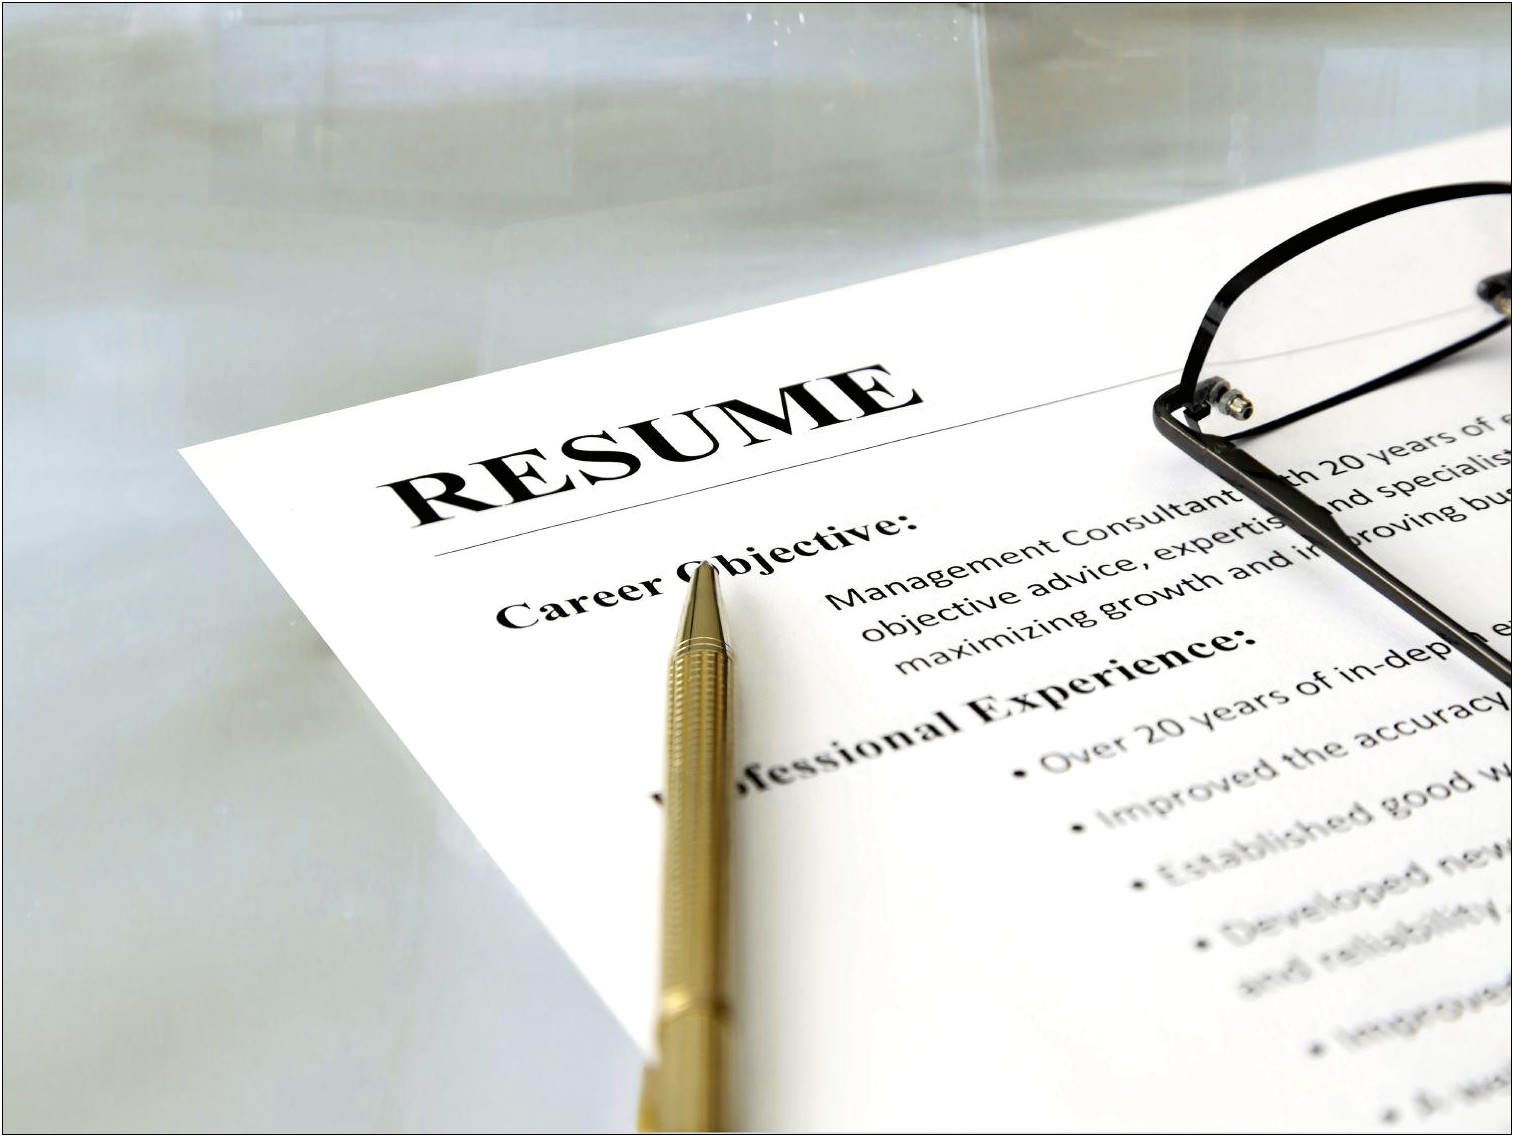 A Great Career Objective For Resume